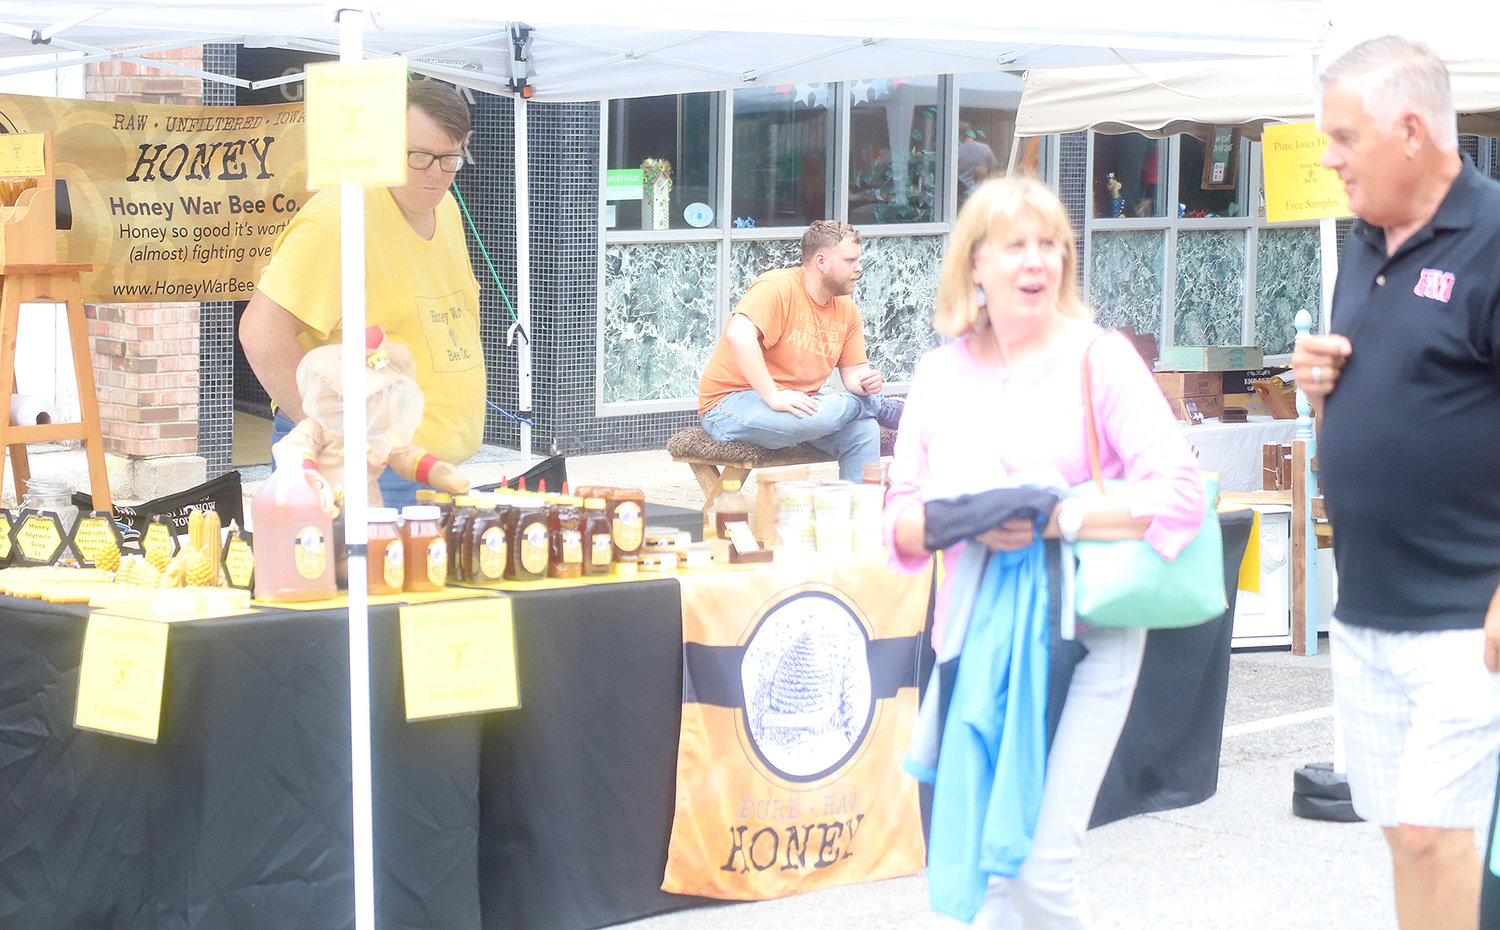 Downtown Summer Market visitors in Fort Madison stop to consider the offerings of the Honey War Bee Co.'s honey and other wares Thursday night in Fort Madison.